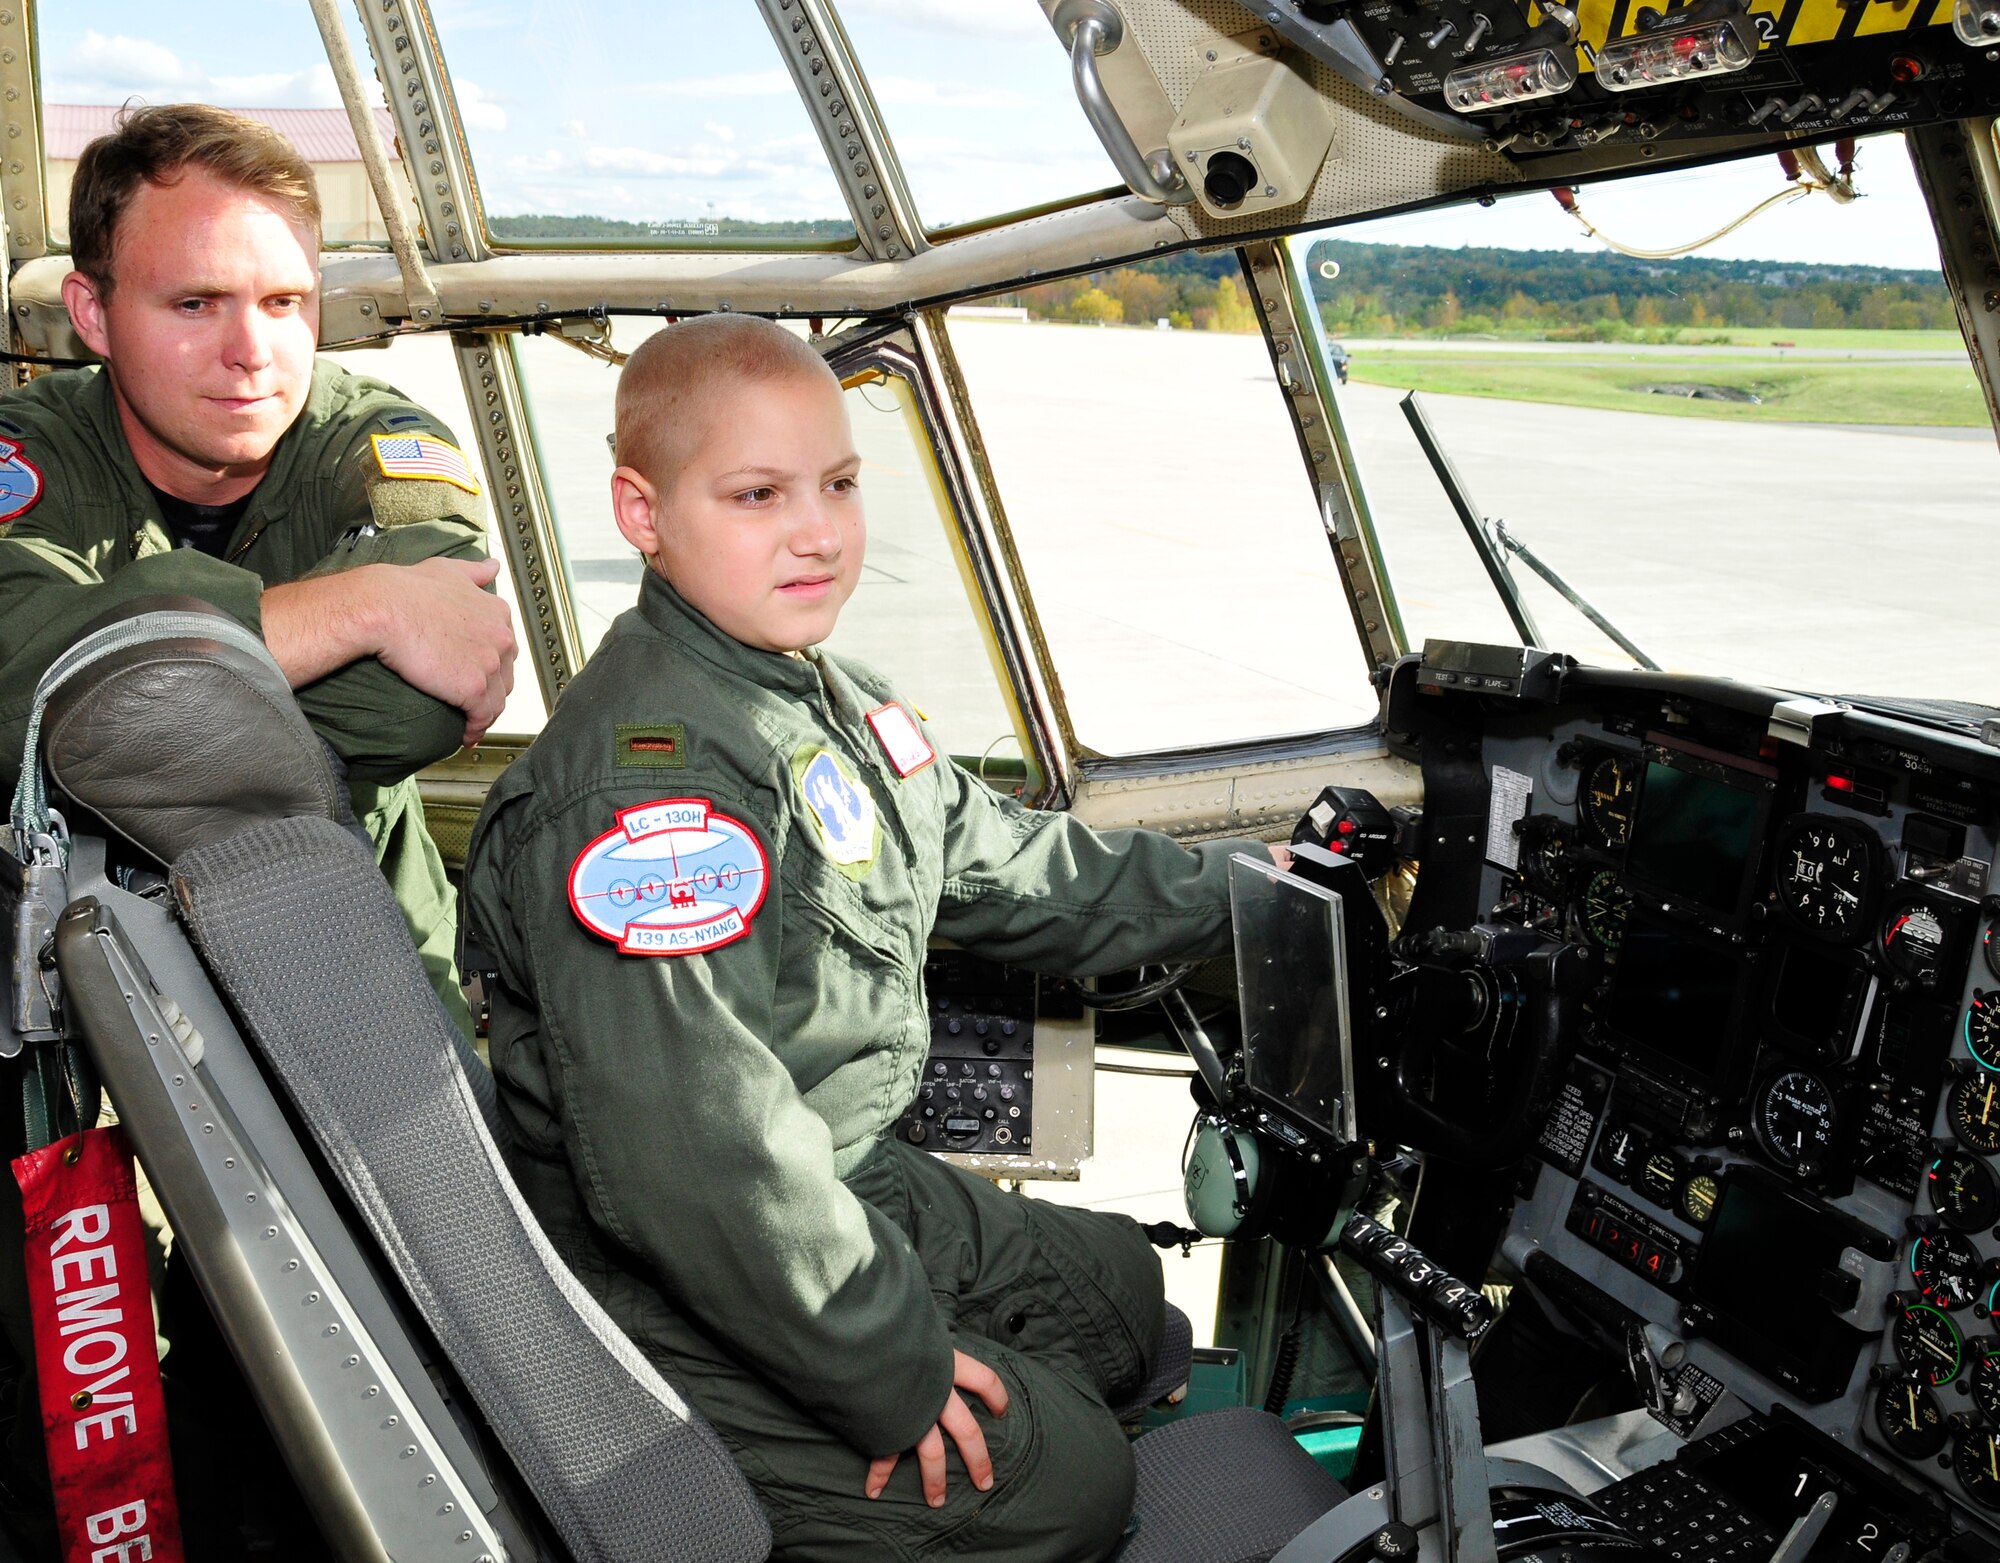 Jacob Kaminski sits in the cockpit of an LC-130 Hercules. Jacob, 9, came to the base Oct. 6 to fulfill his dream of being a soldier for a day. After spending the day with the Army, he came to the base to see what it was like to be a pilot with the 109th Airlift Wing. Jacob has been diagnosed with leukemia. (U.S. Air Force photo by Master Sgt. Willie Gizara)